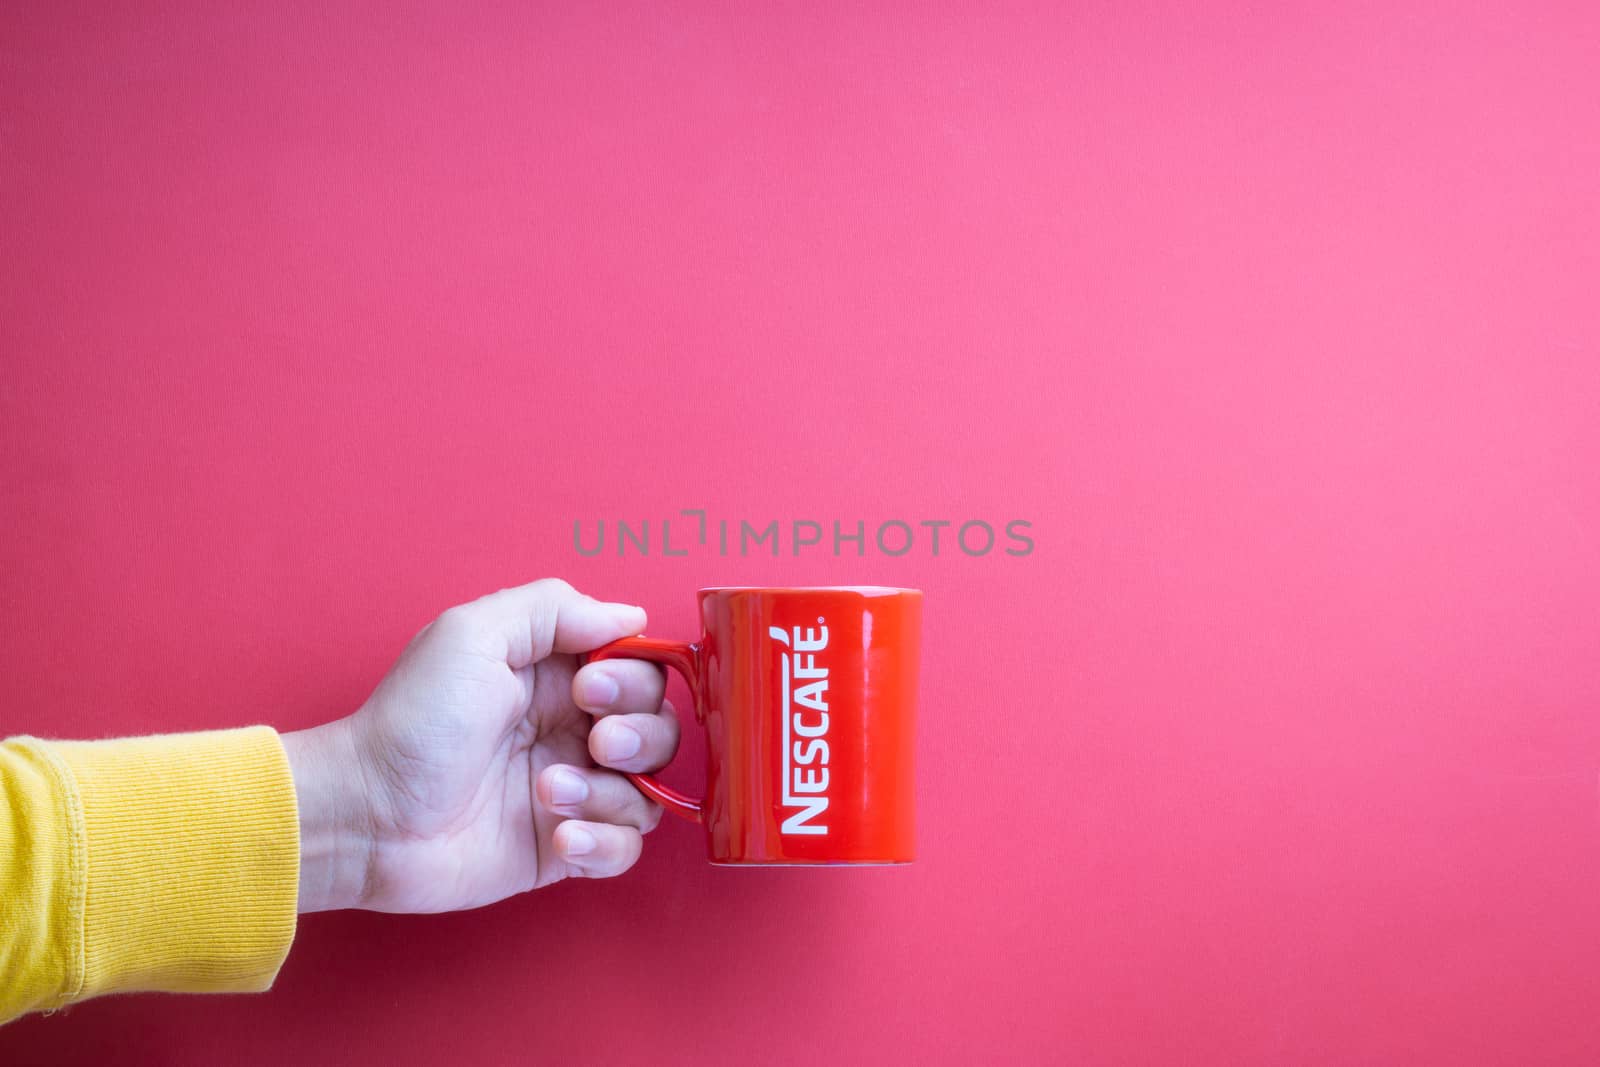 Hand holding Nescafe Mug on red background by silverwings